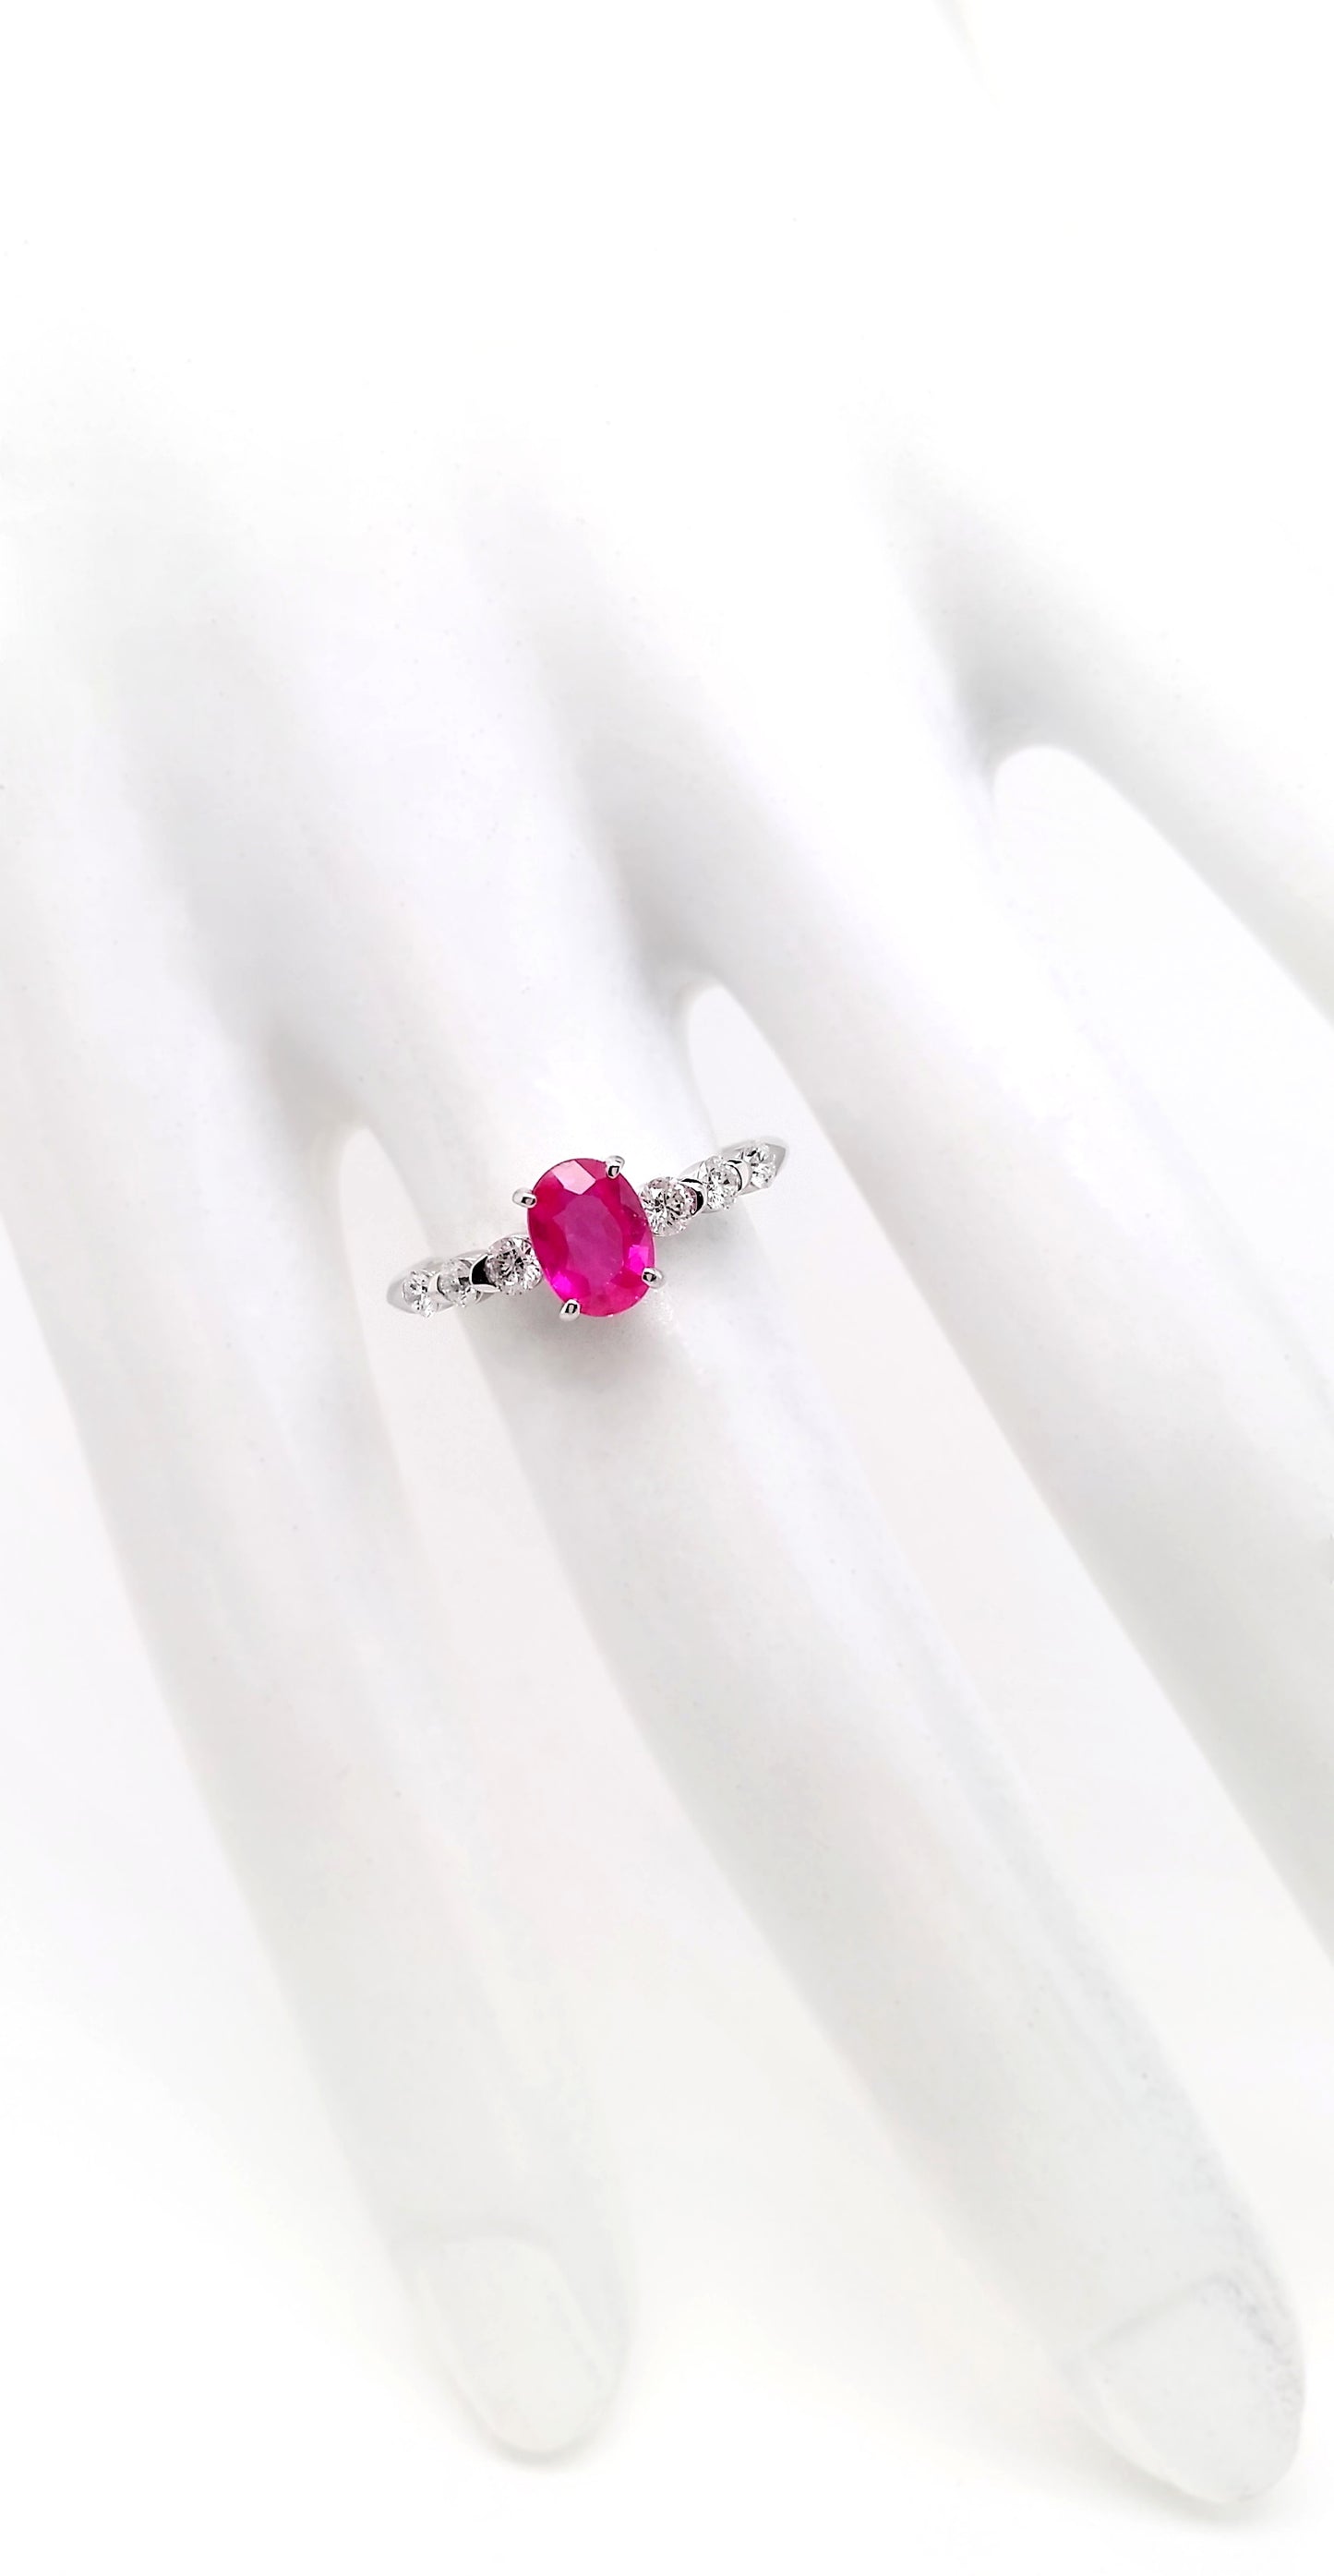 1.13ct NATURAL PINK-SAPPHIRE and 0.32ct NATURAL DIAMONDS set in Platinum Ring